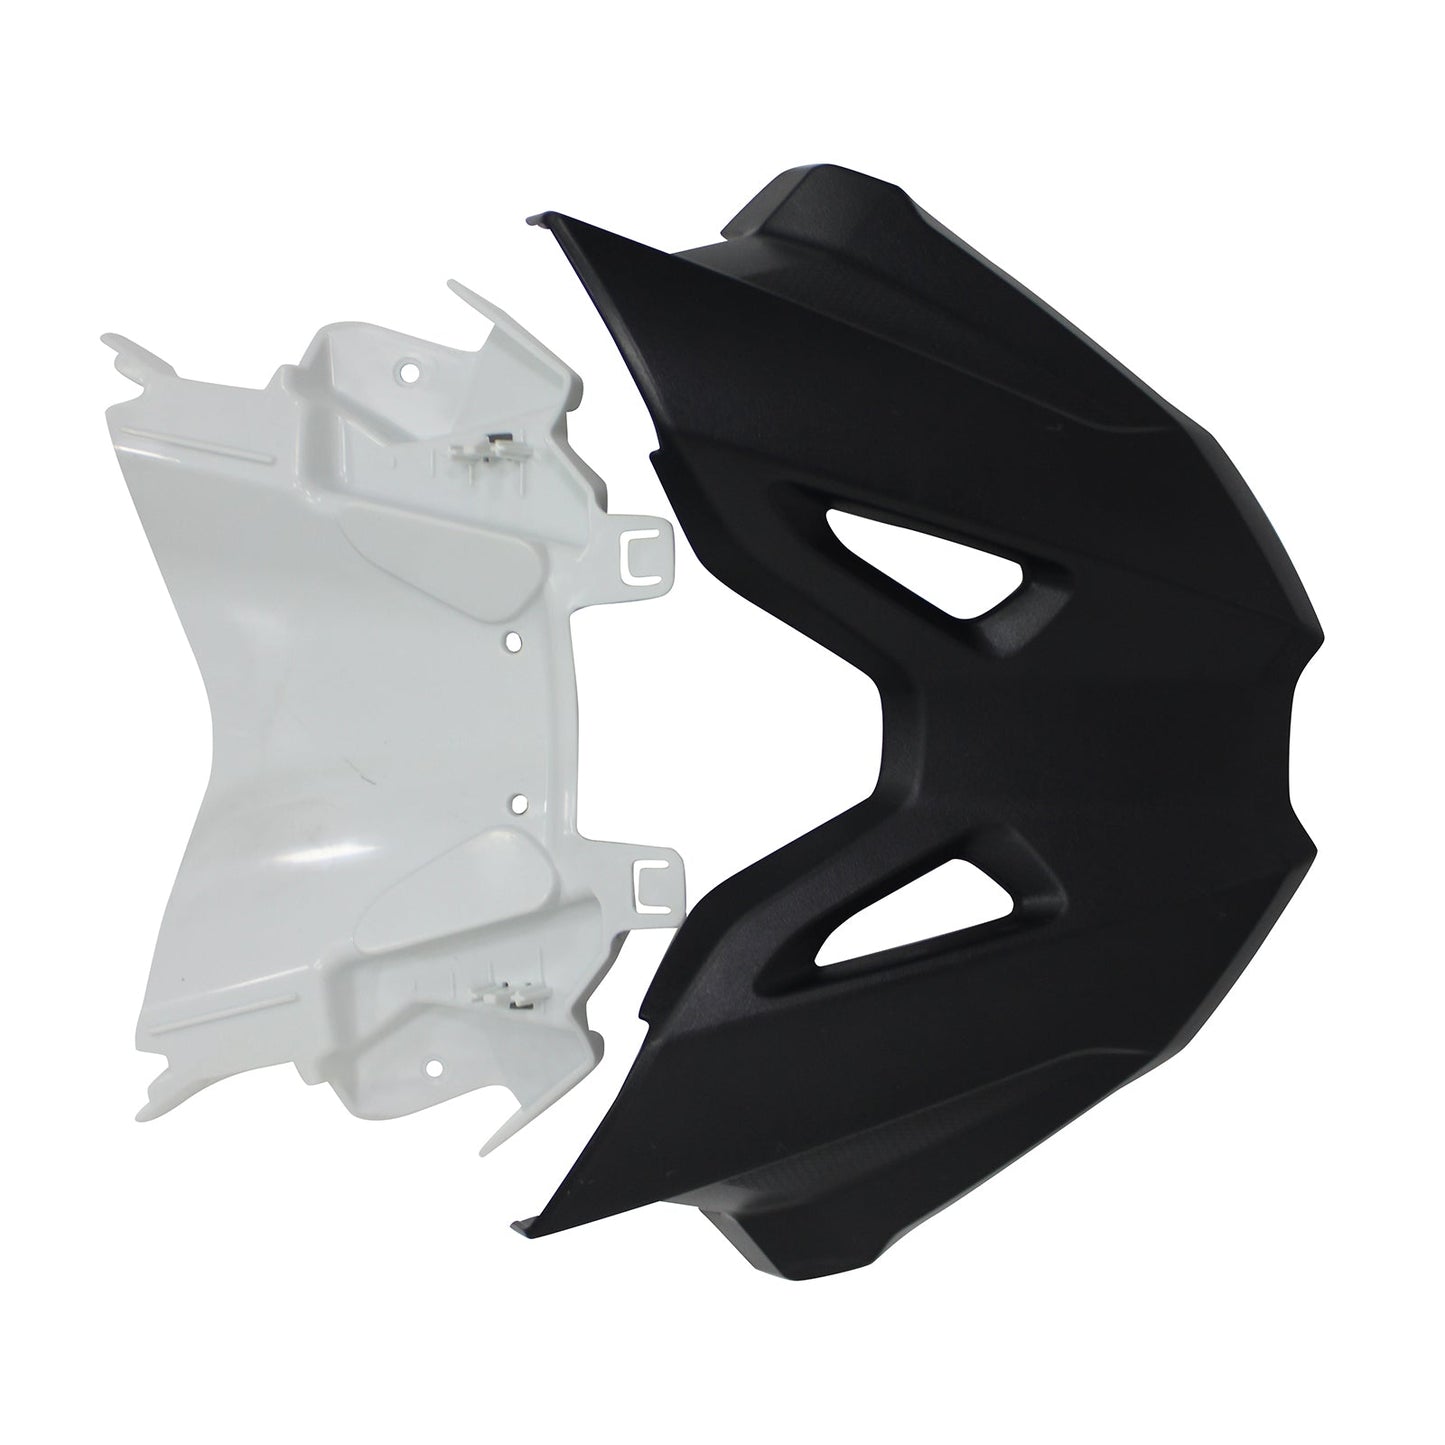 Amotopart BMW F750/850GS 2018-2022 Fairing Injection Molding Unpainted